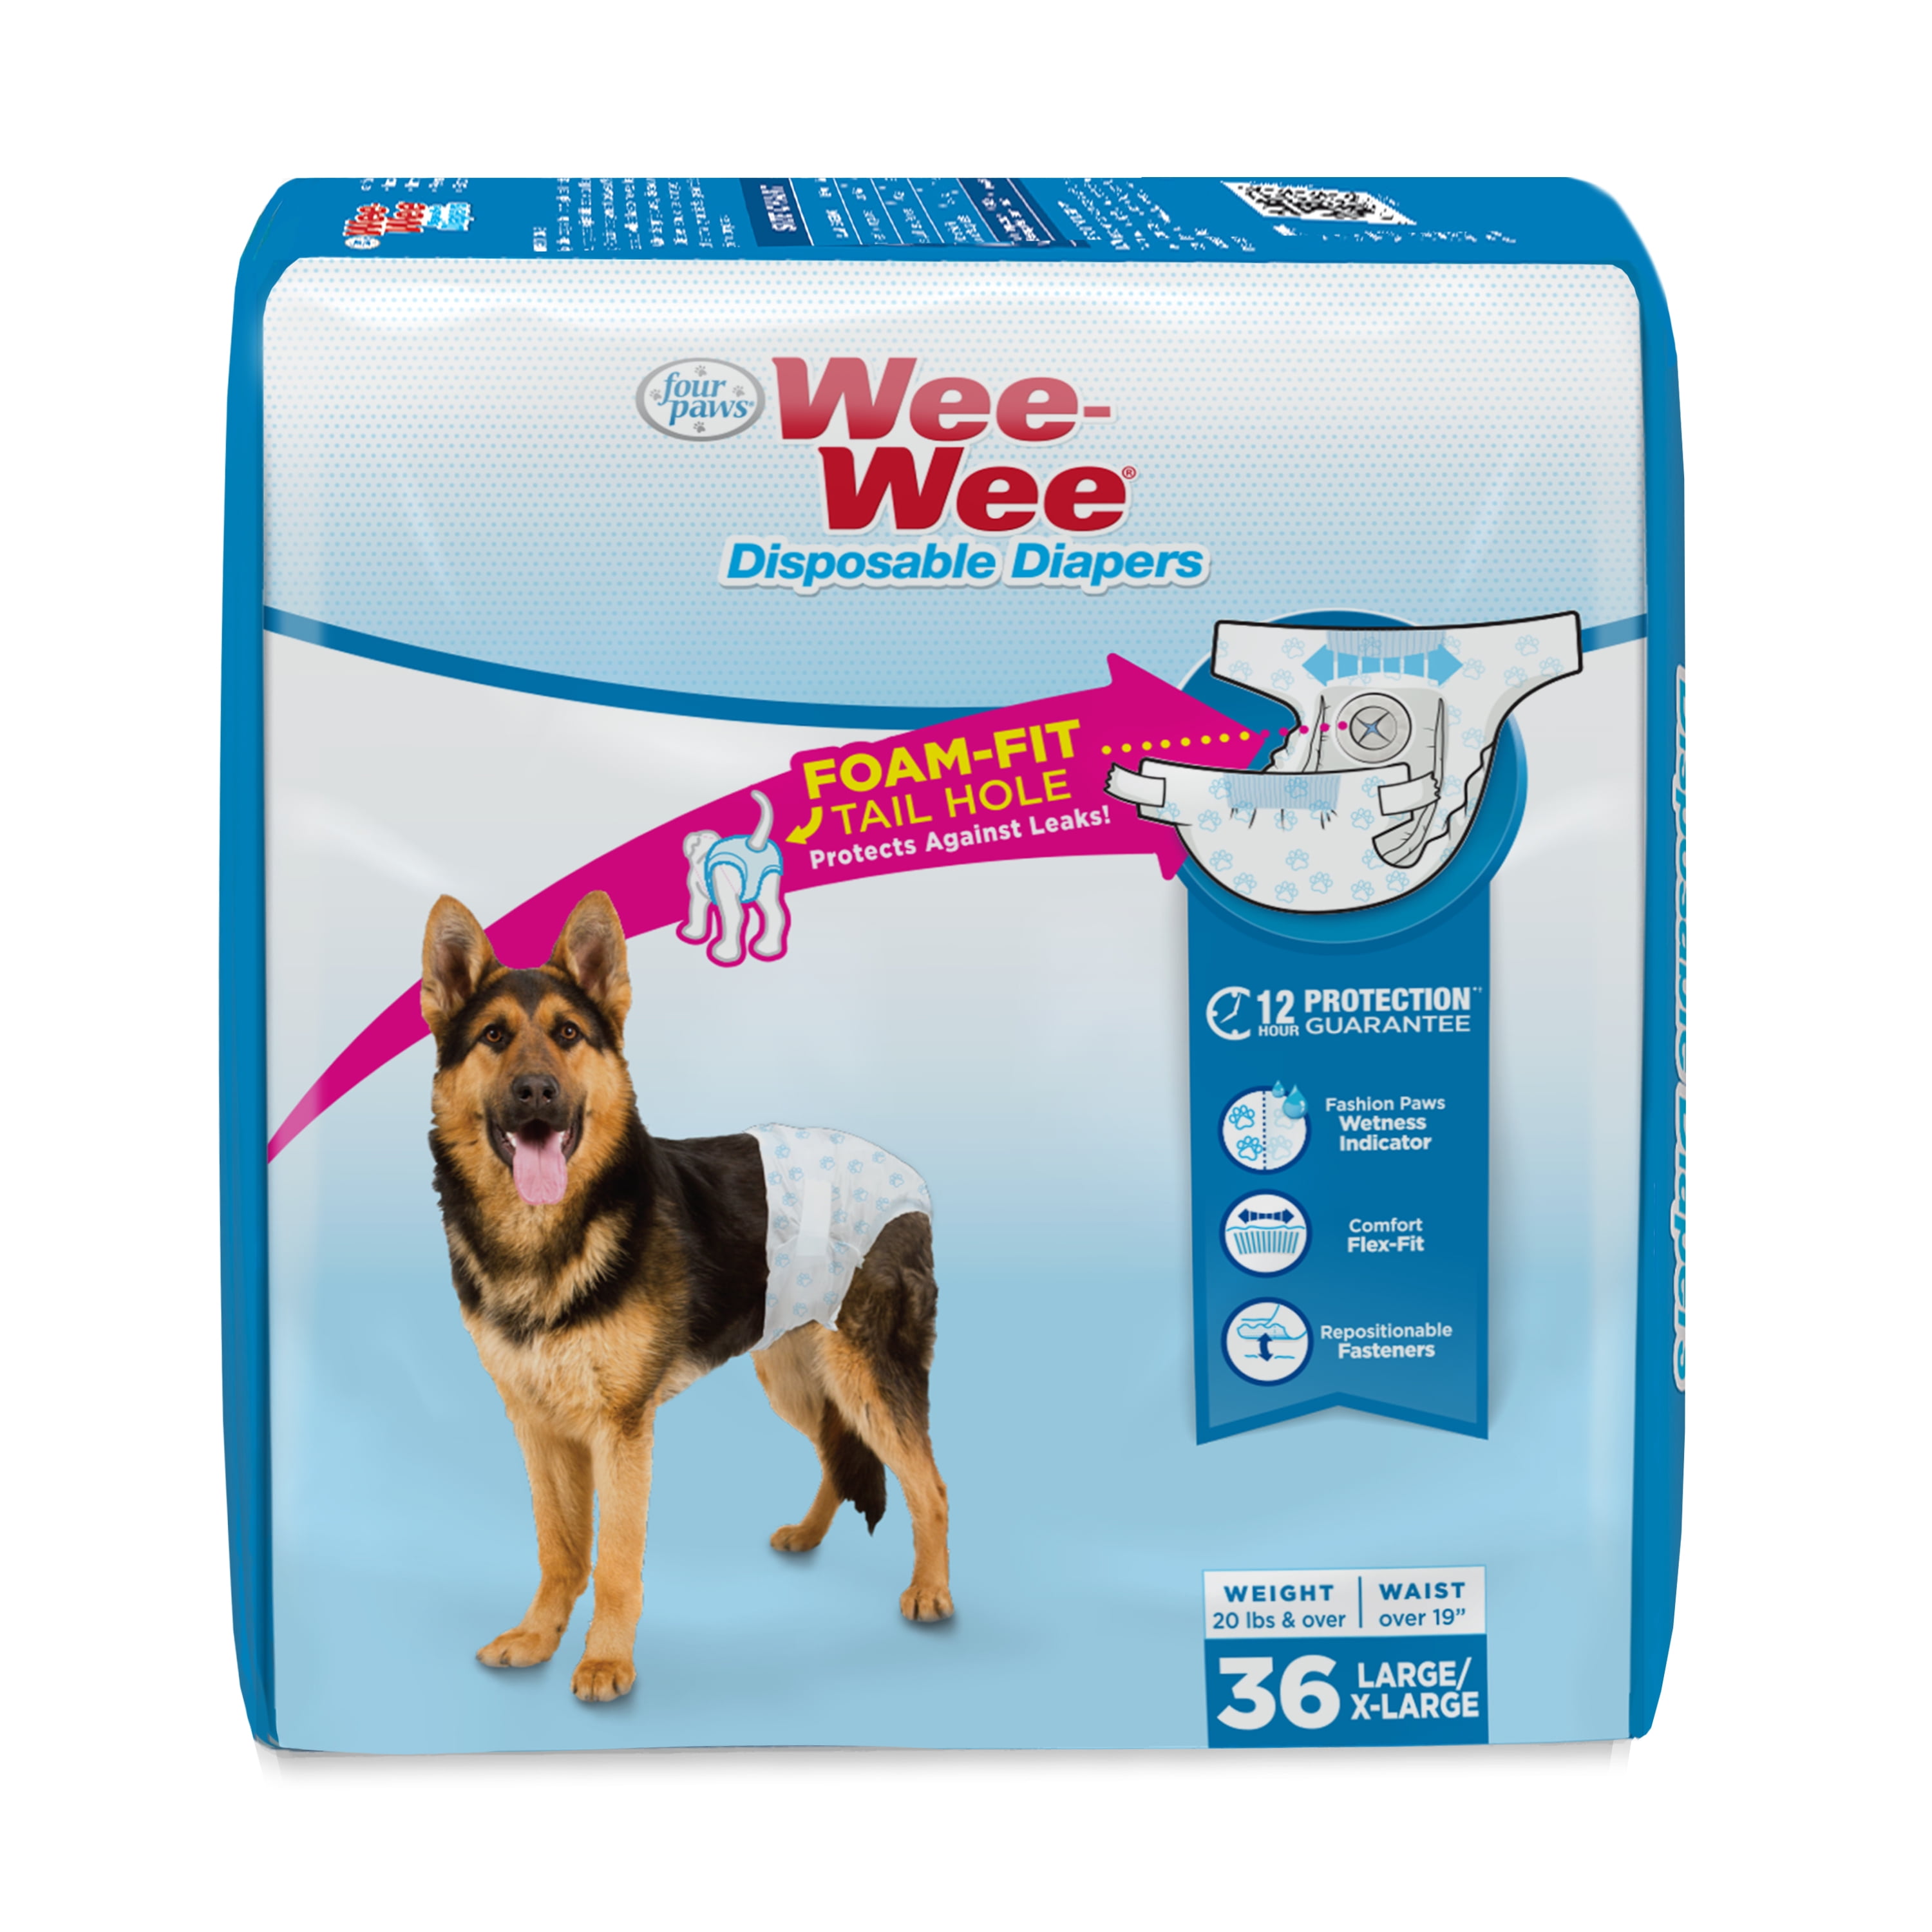 Four Paws Products 100534953 Wee-Wee Disposable Diapers - 36 Count